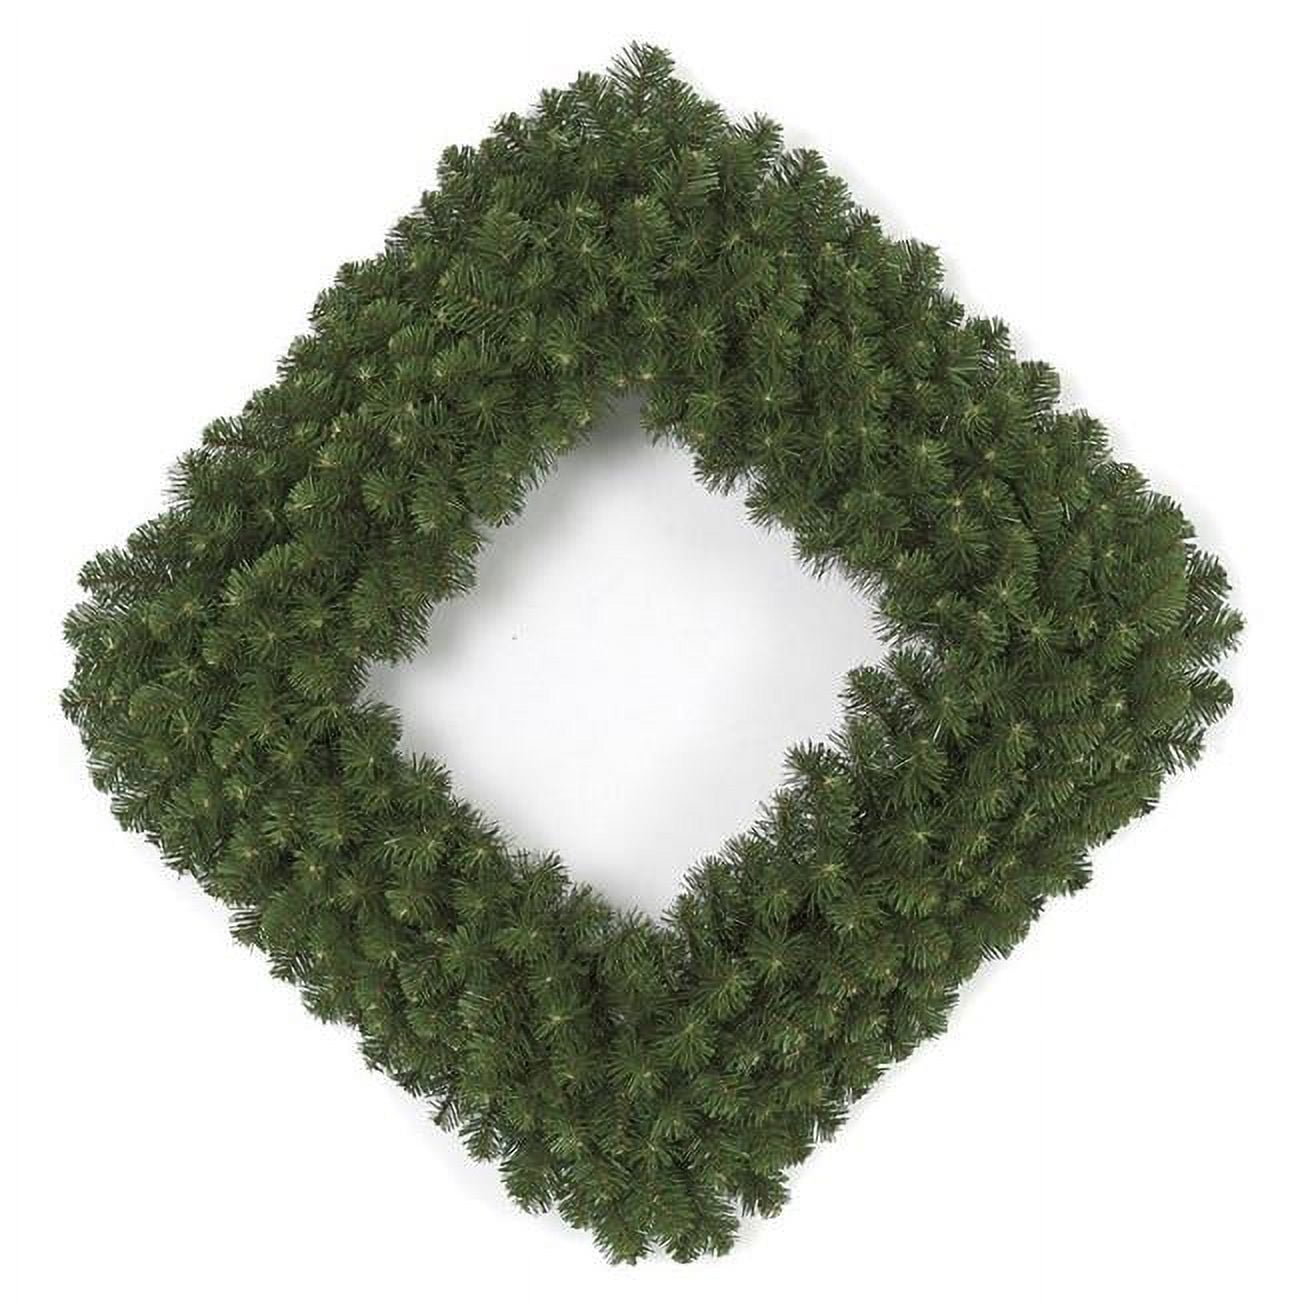 Picture of Autograph Foliages C-170880 36 in. Square Wreath, Green